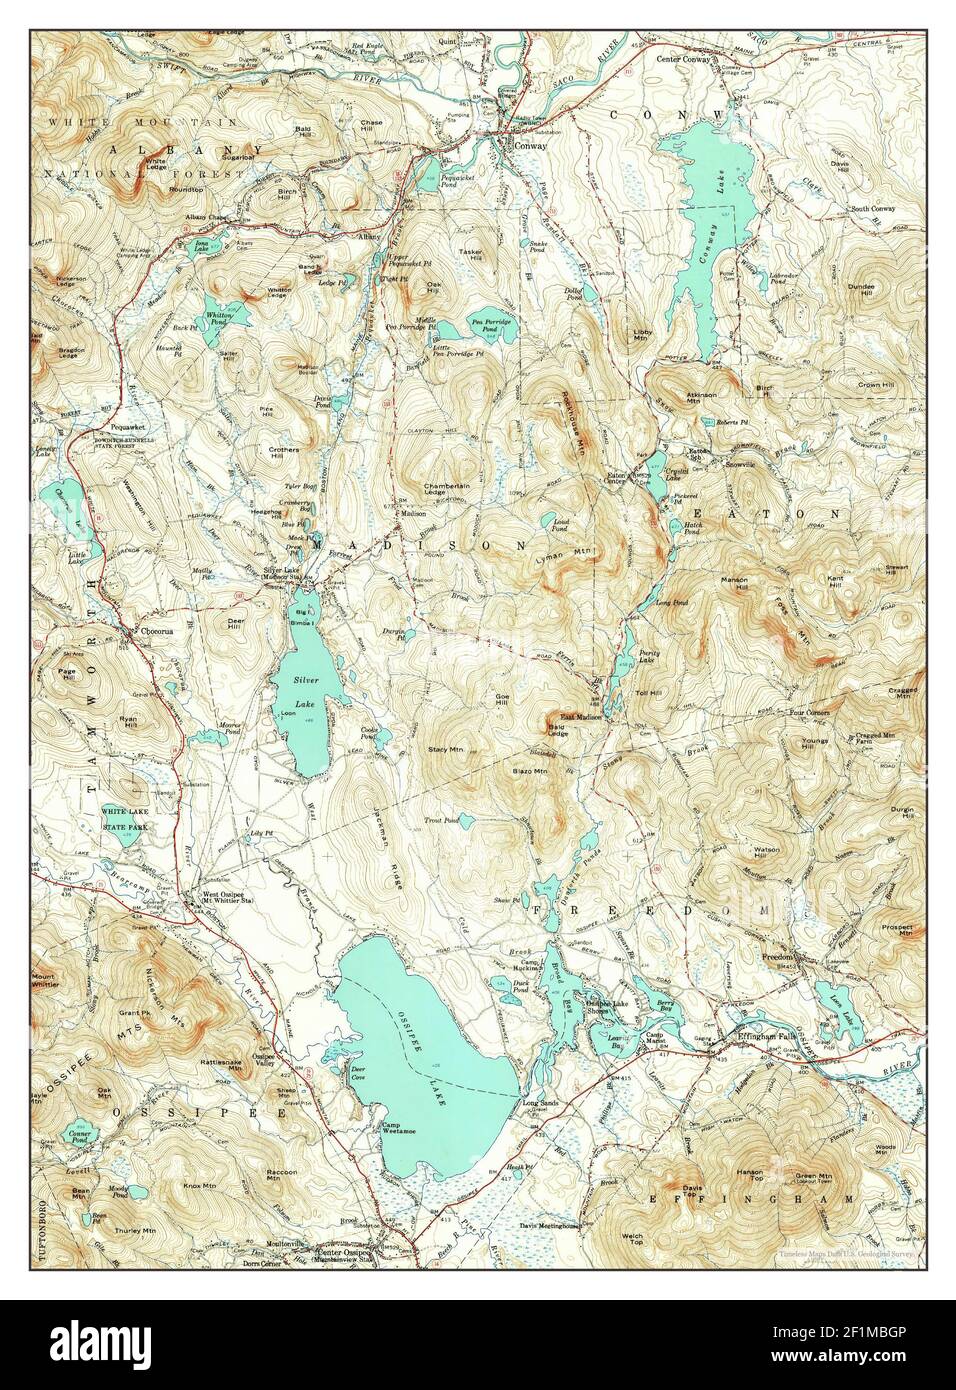 Ossipee Lake, New Hampshire, map 1958, 1:62500, United States of America by Timeless Maps, data U.S. Geological Survey Stock Photo